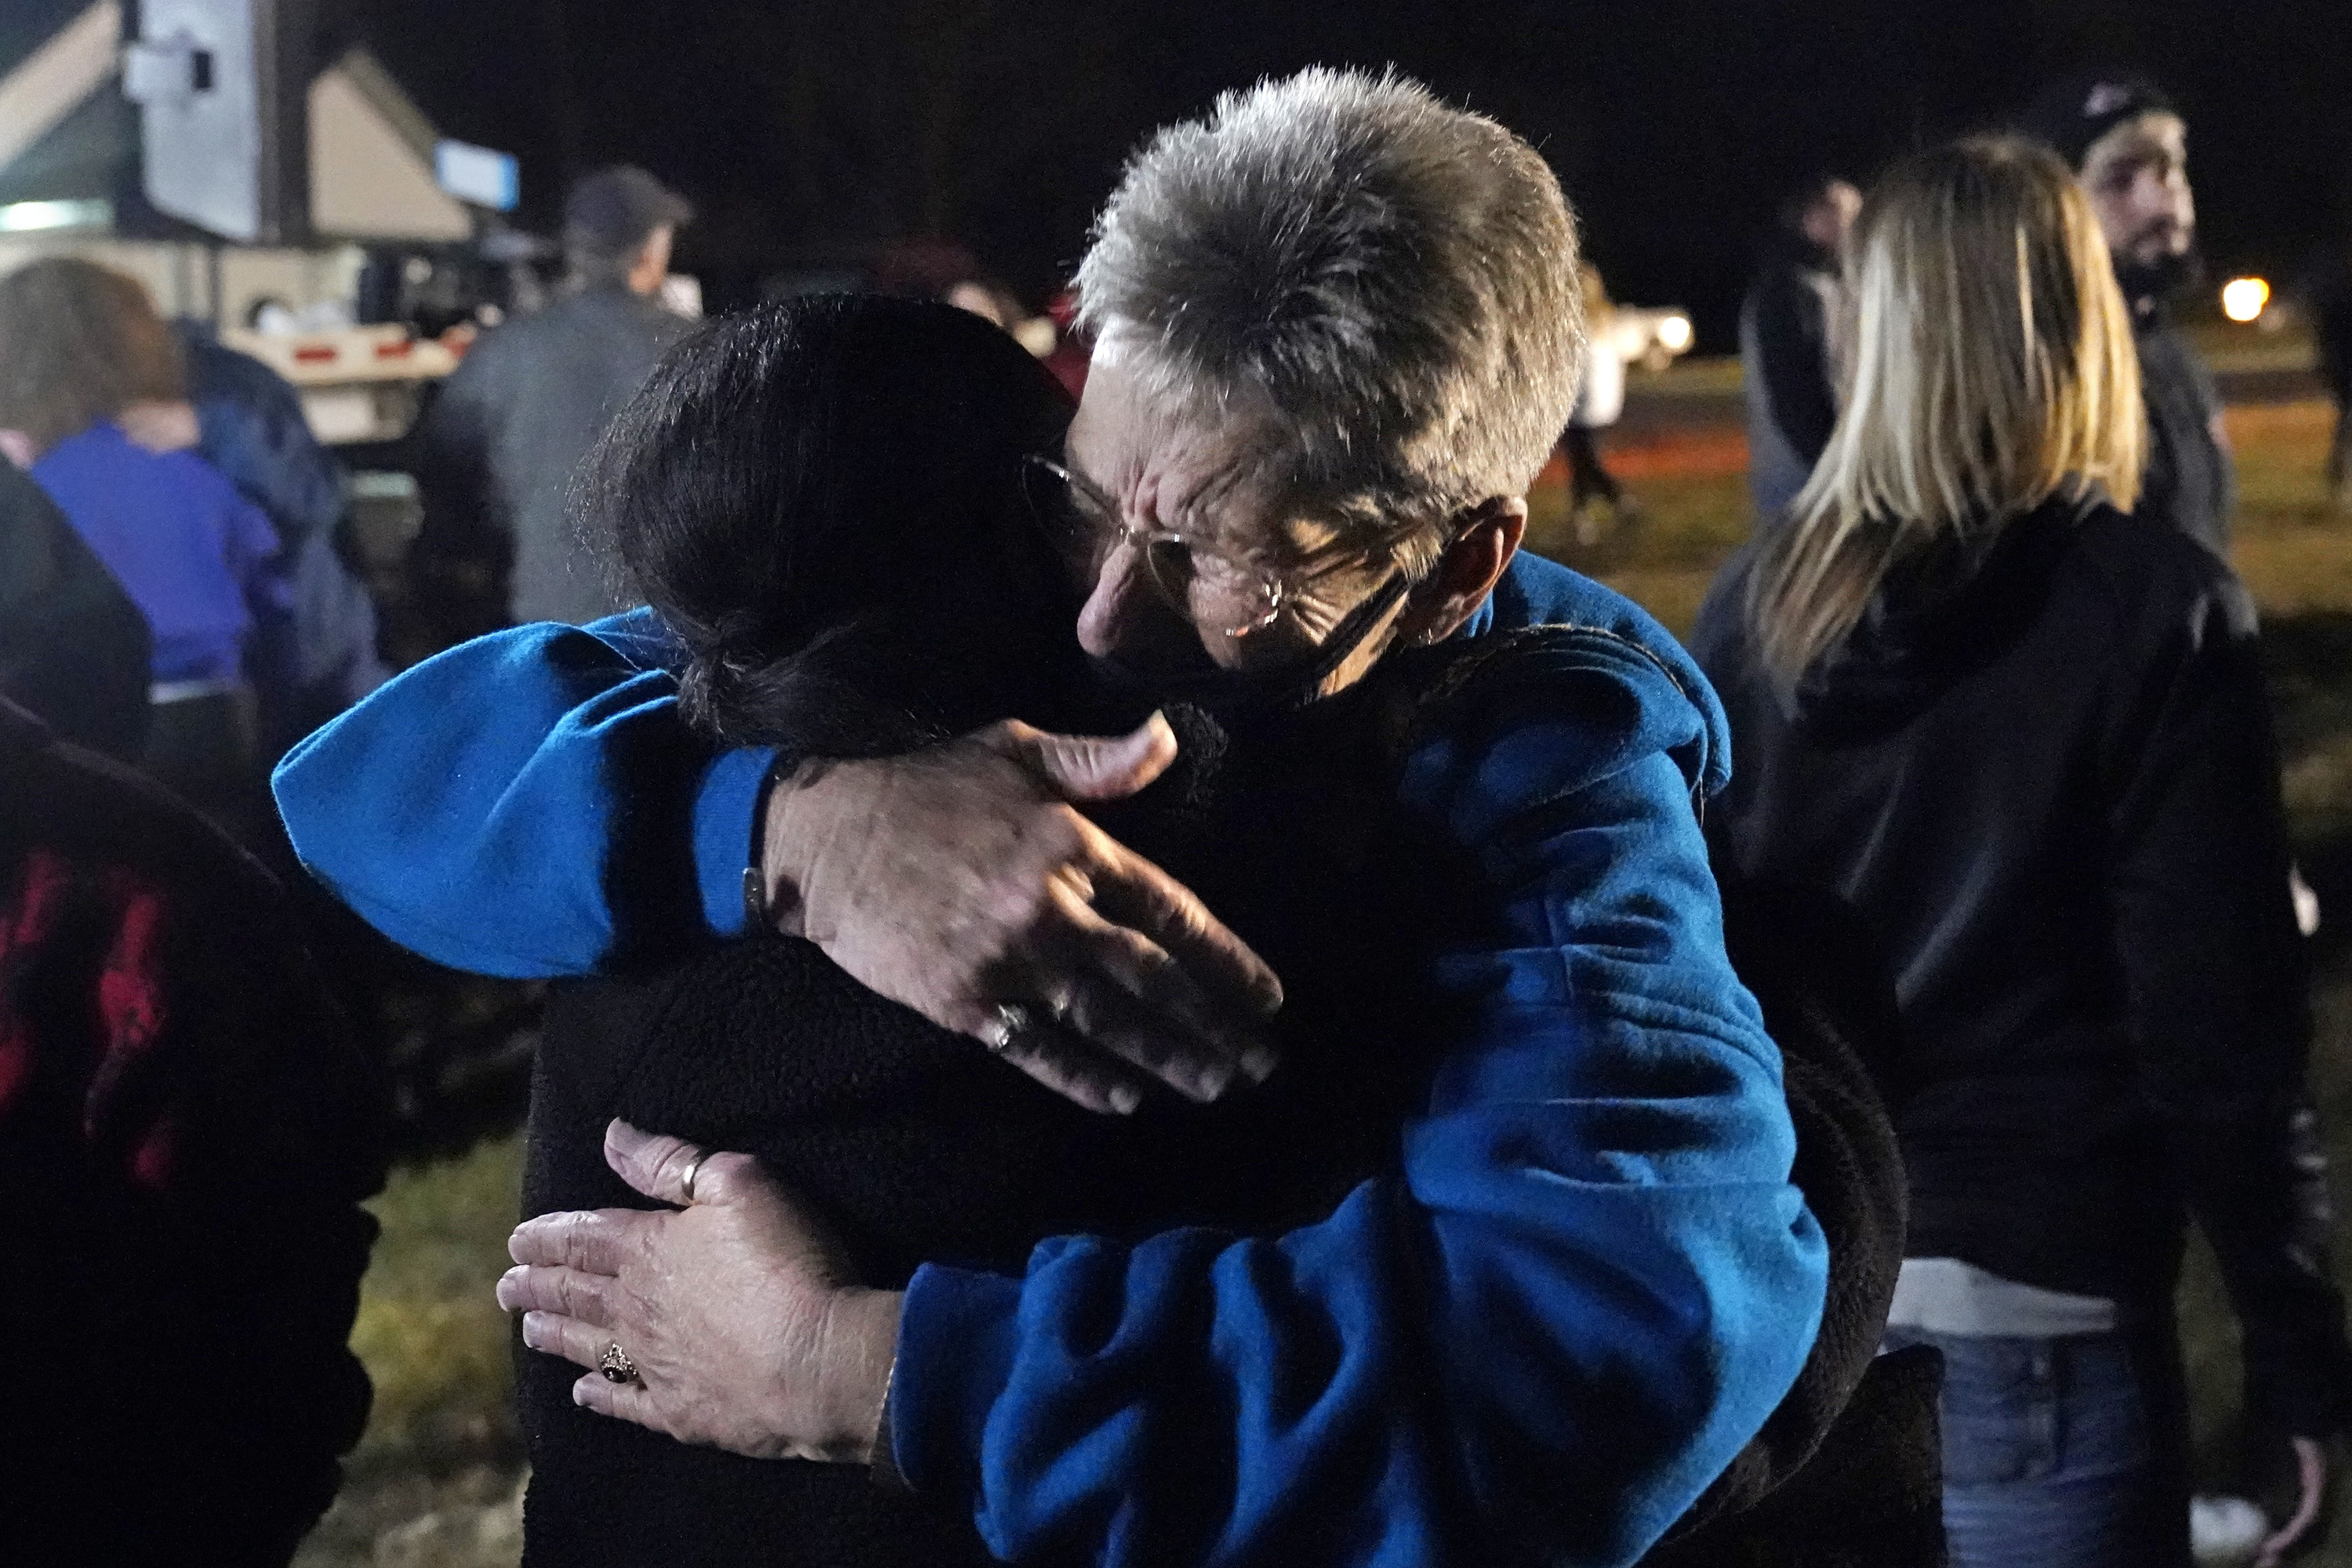 A woman hugs another woman at a vigil outside at night in kentucky 